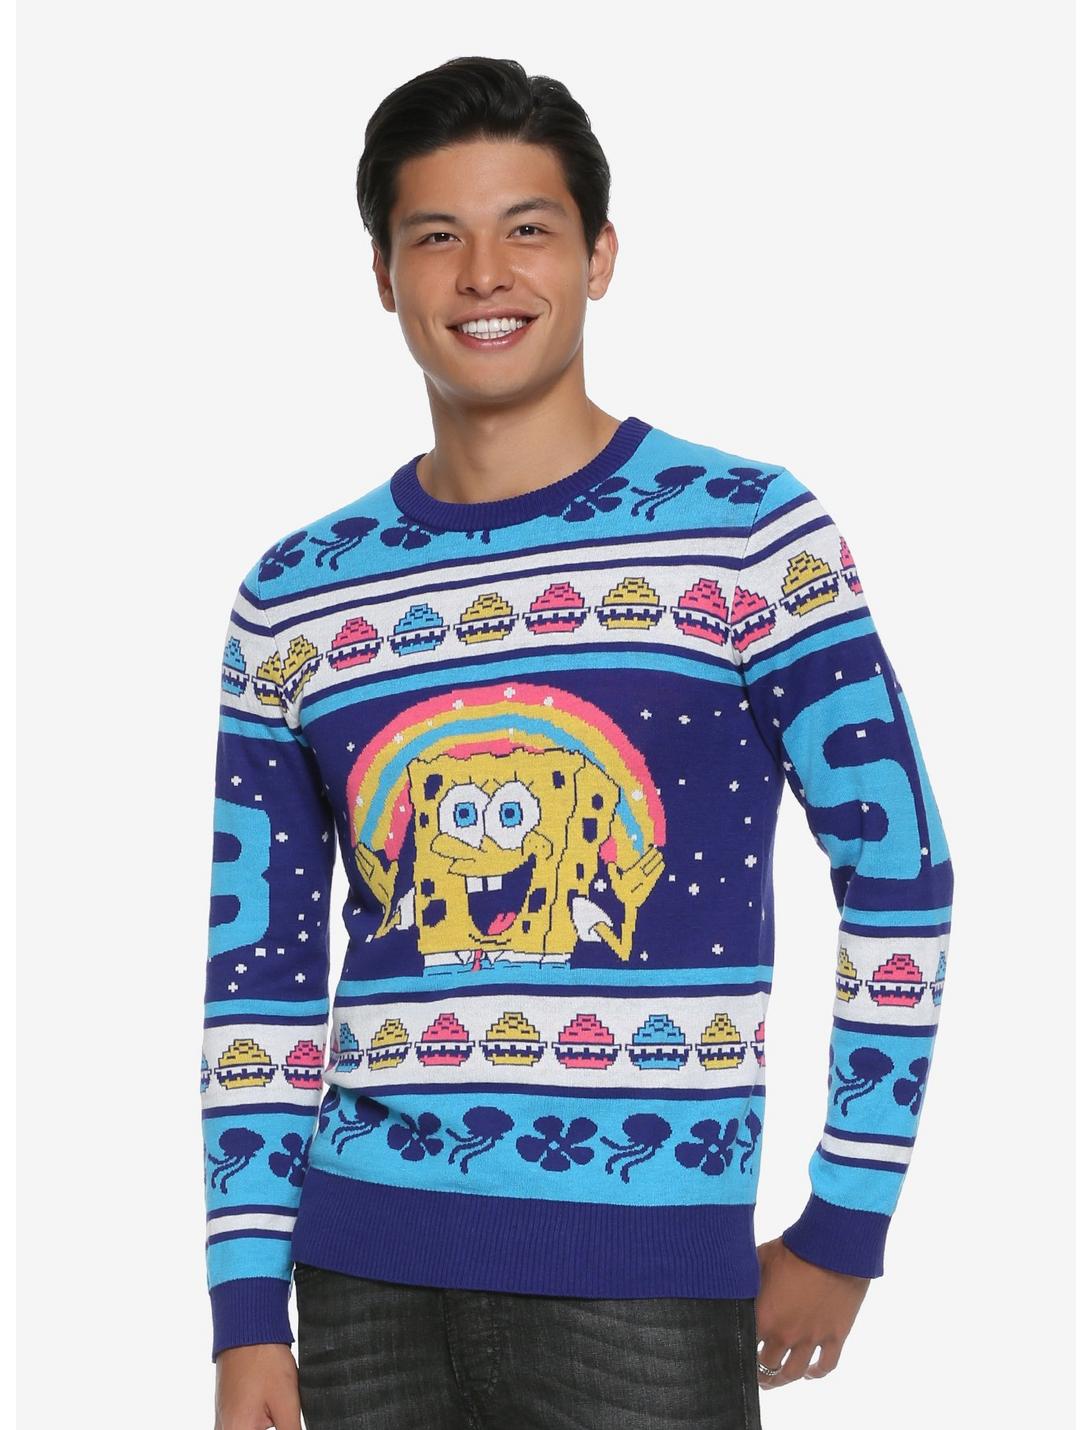 SpongeBob SquarePants Krabby Patty Holiday Sweater - BoxLunch Exclusive, BLUE, hi-res